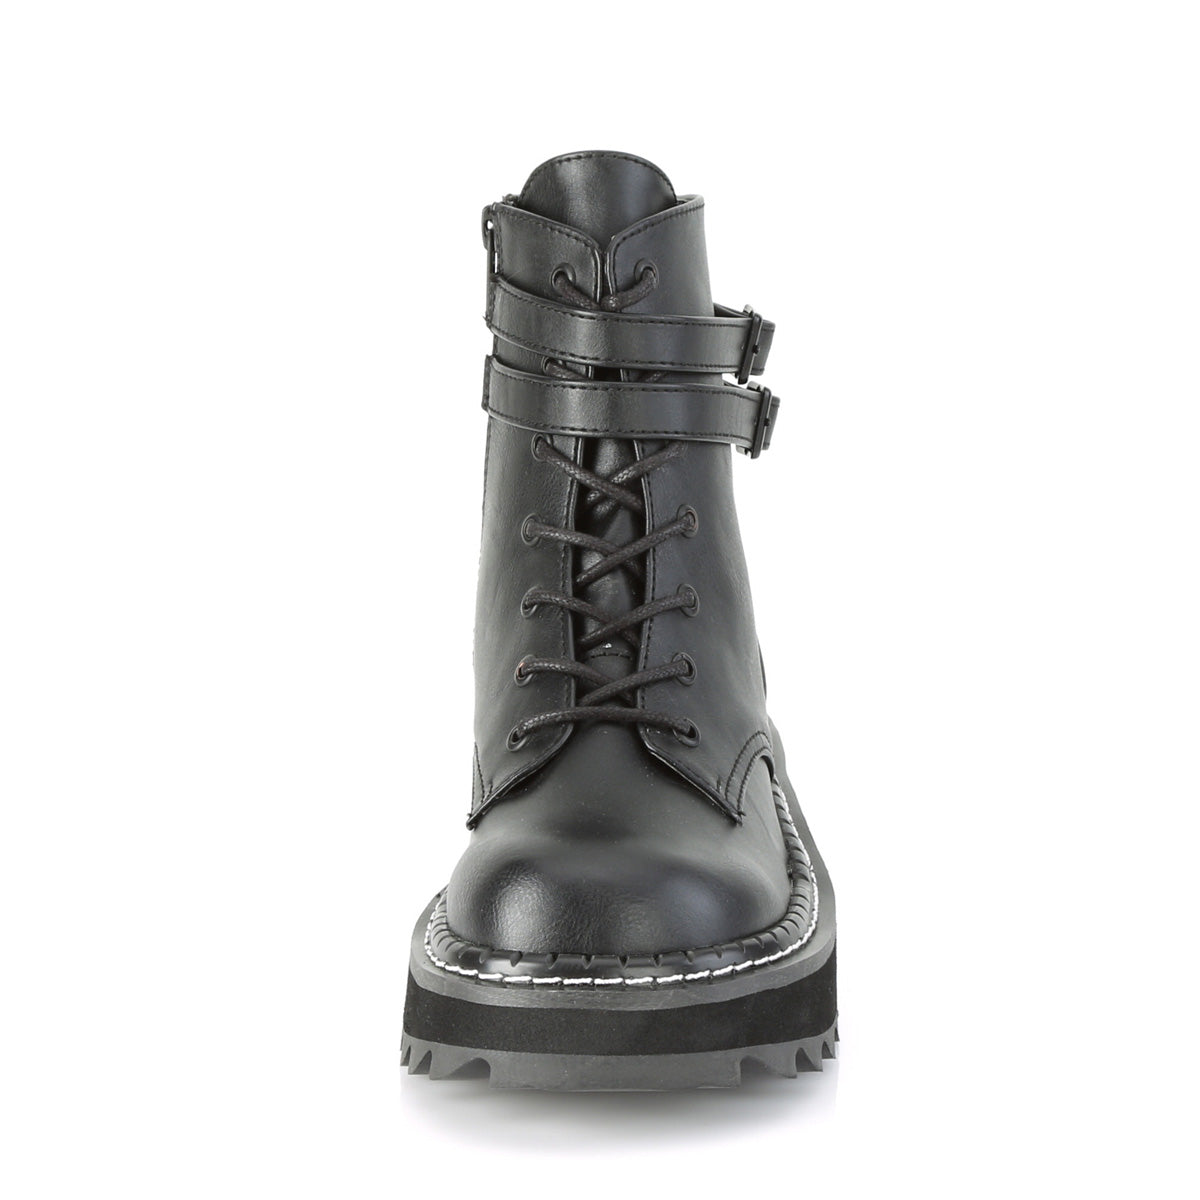 LILITH-152 Black Vegan Leather Ankle Boot Demonia